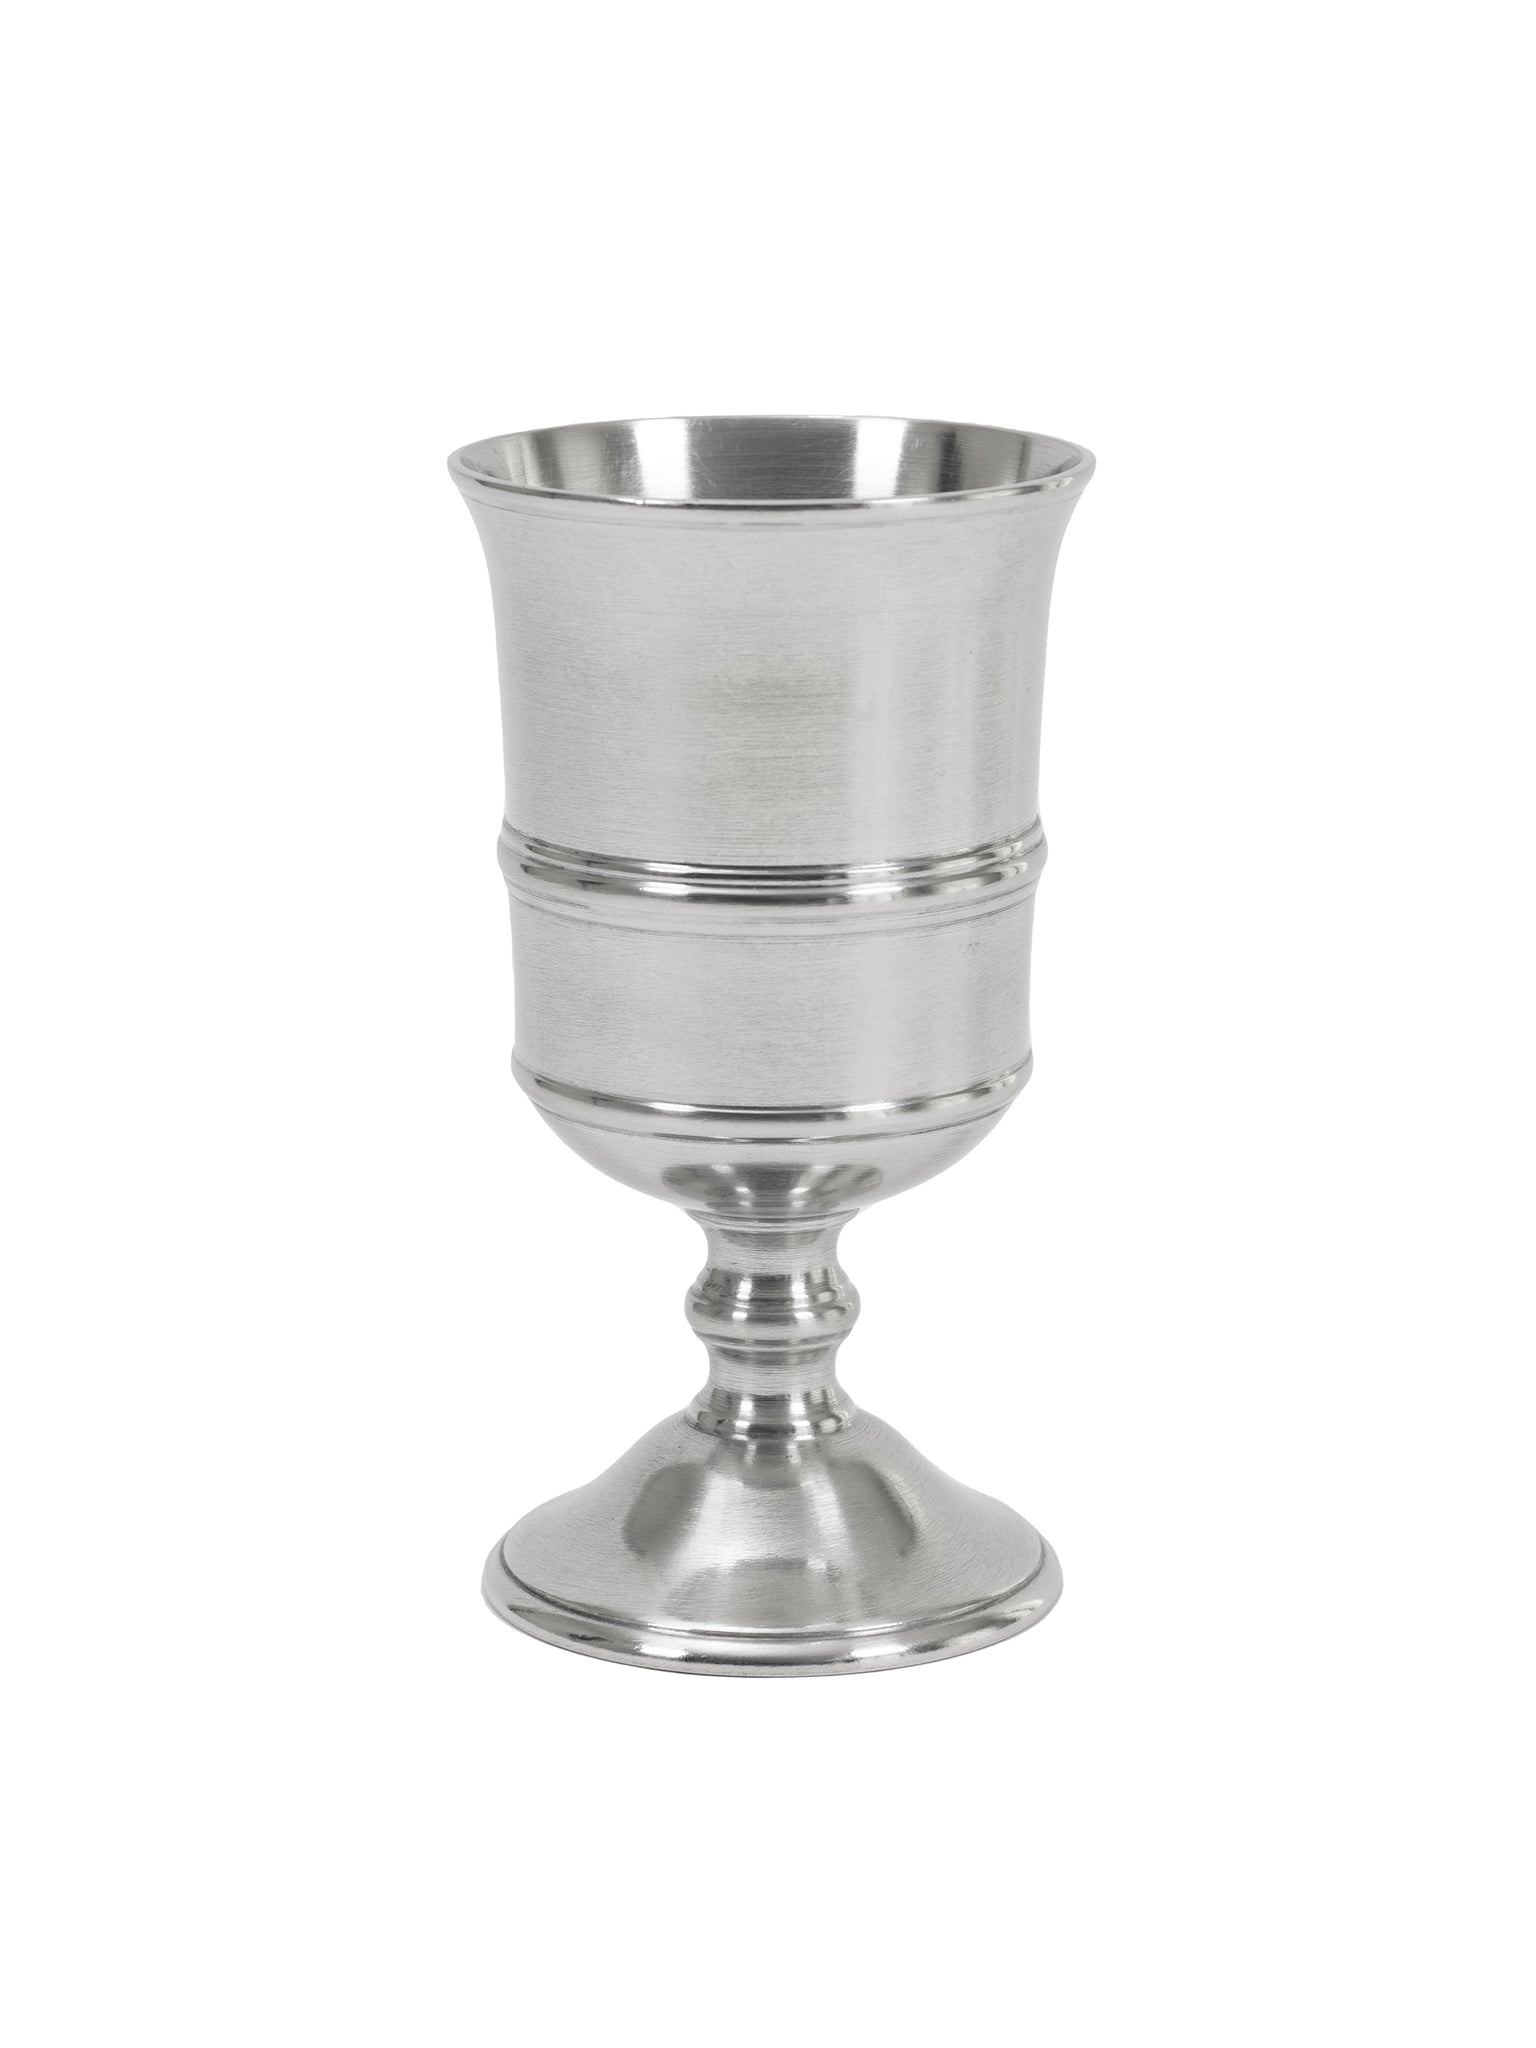 MATCH Pewter Arno Goblet Weston Table